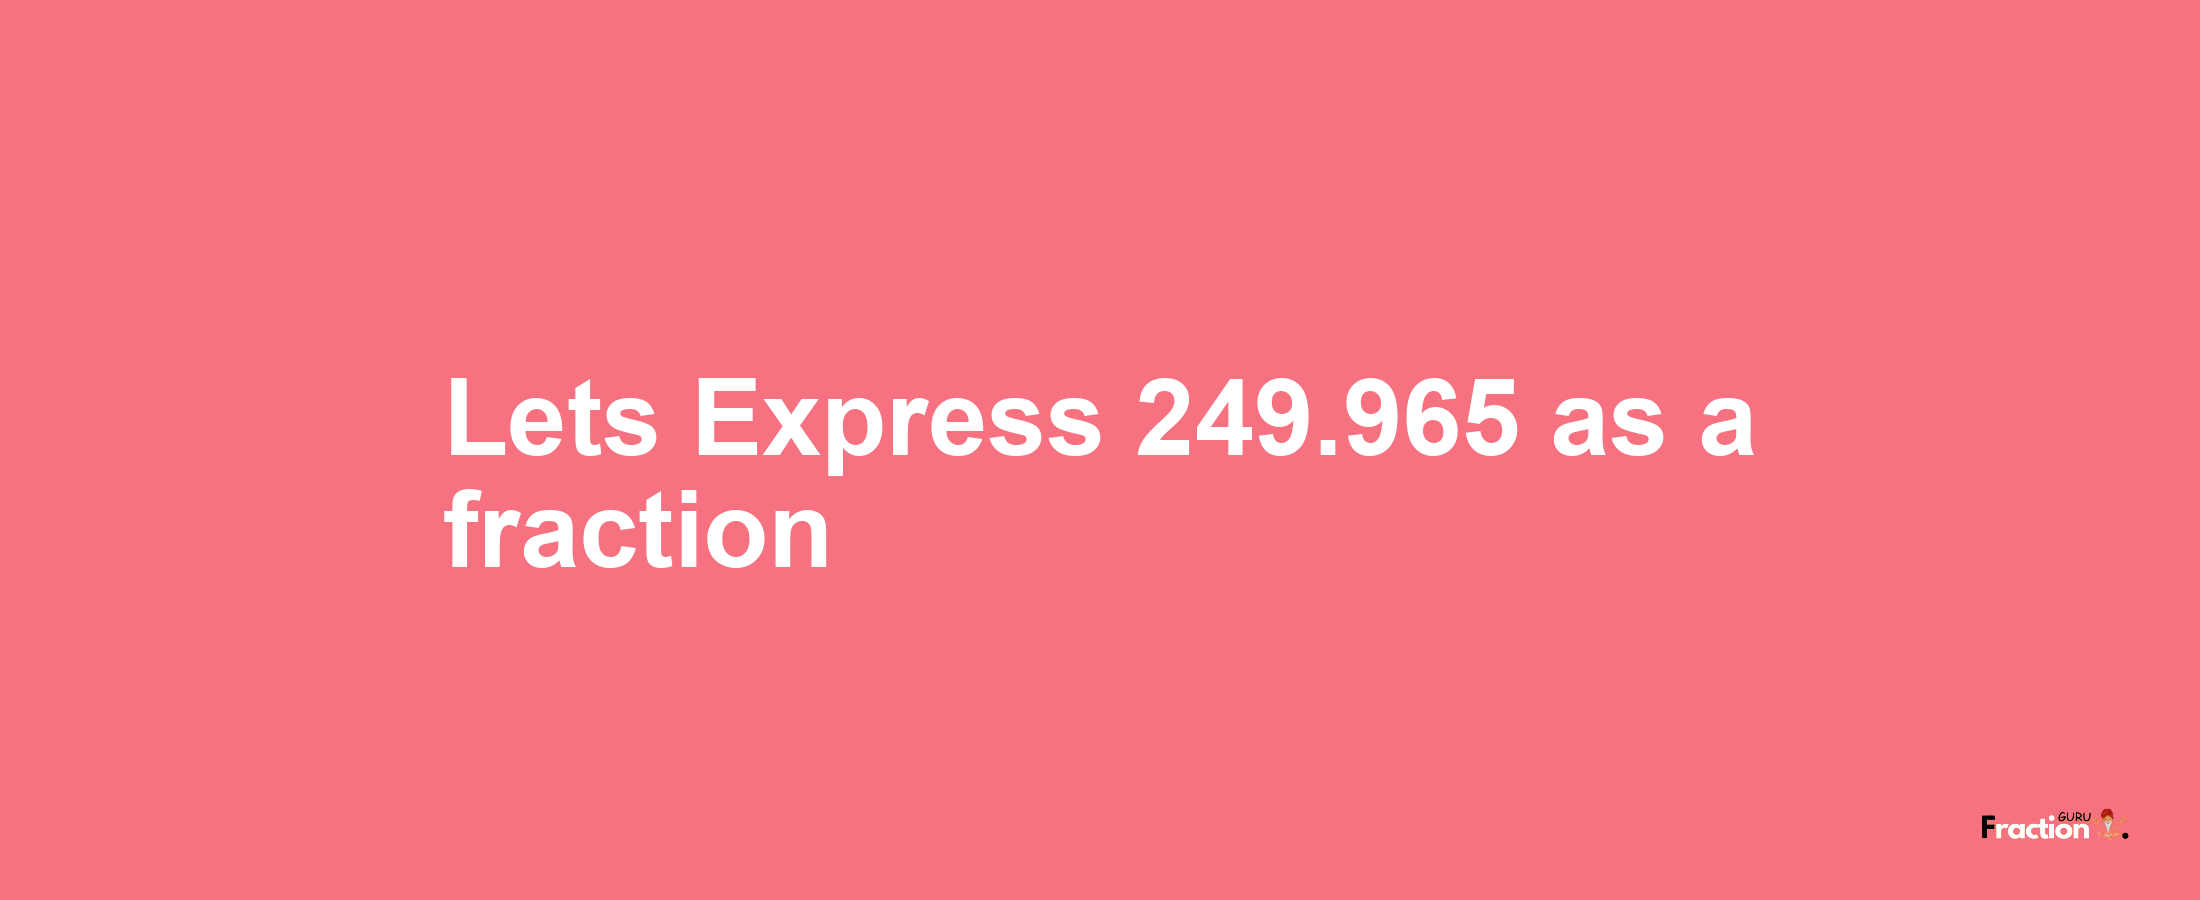 Lets Express 249.965 as afraction